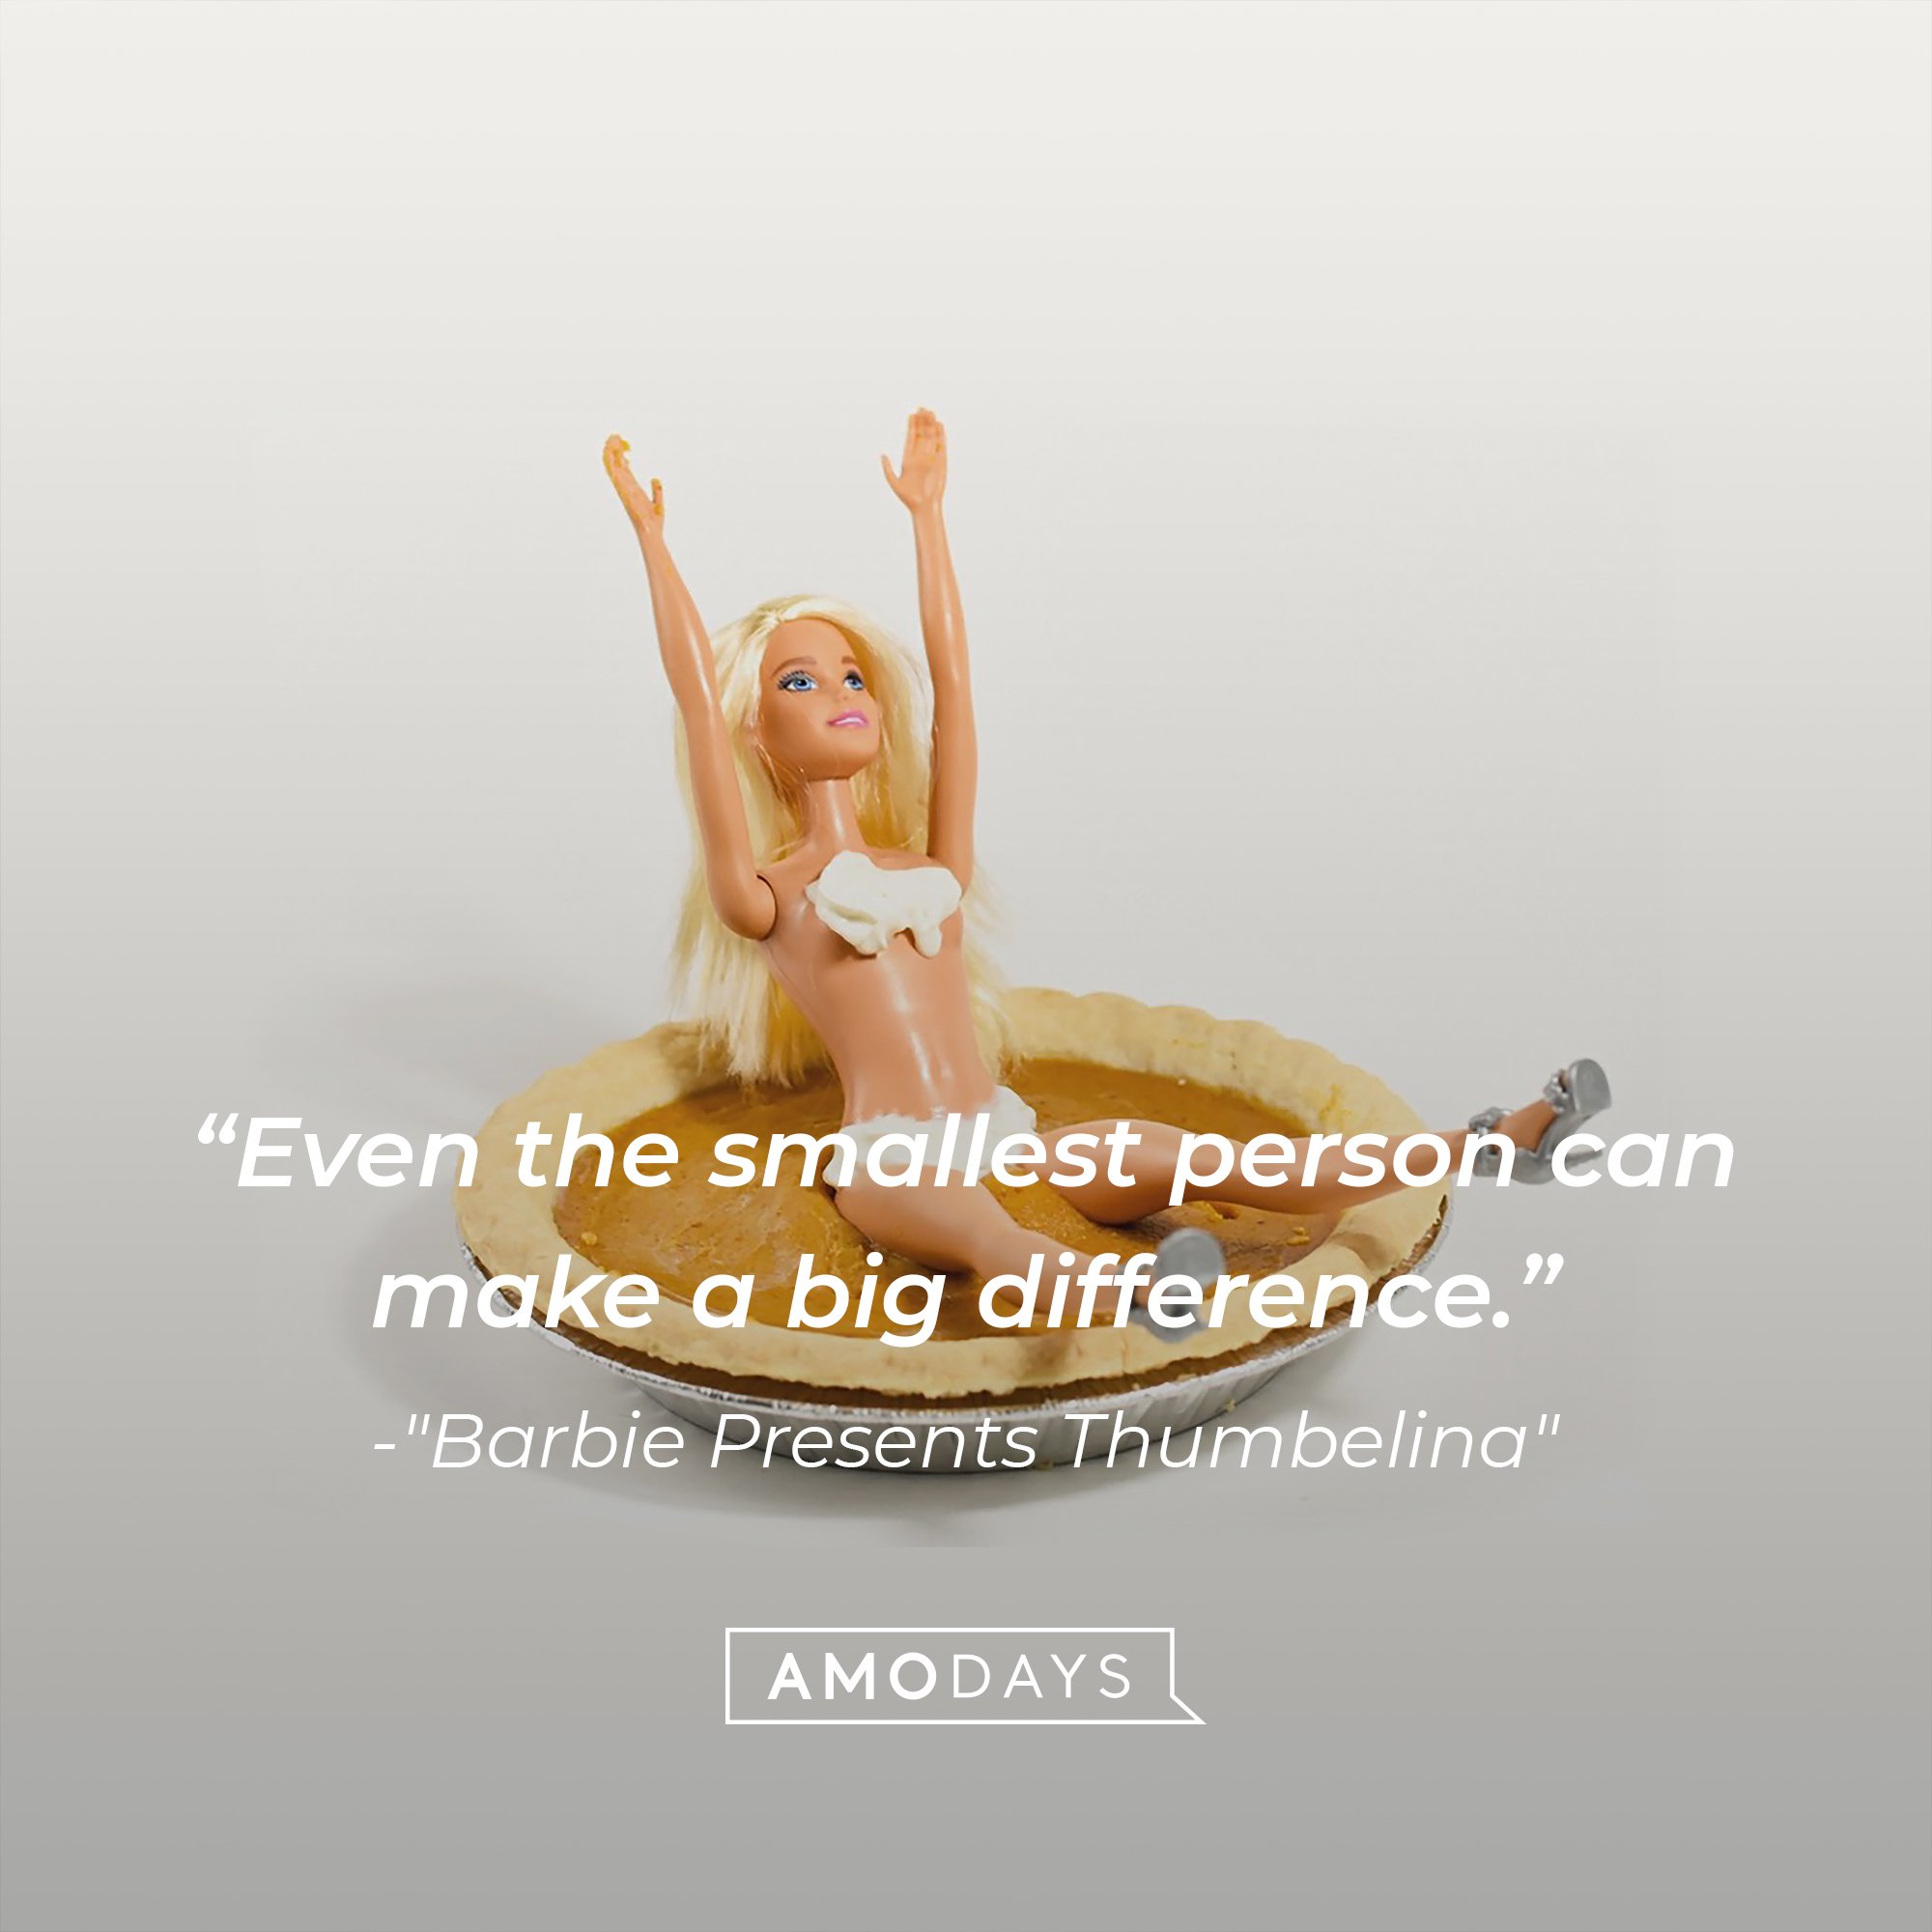 "Barbie Presents Thumbelina's" quote: "Even the smallest person can make a big difference." | Image: AmoDays